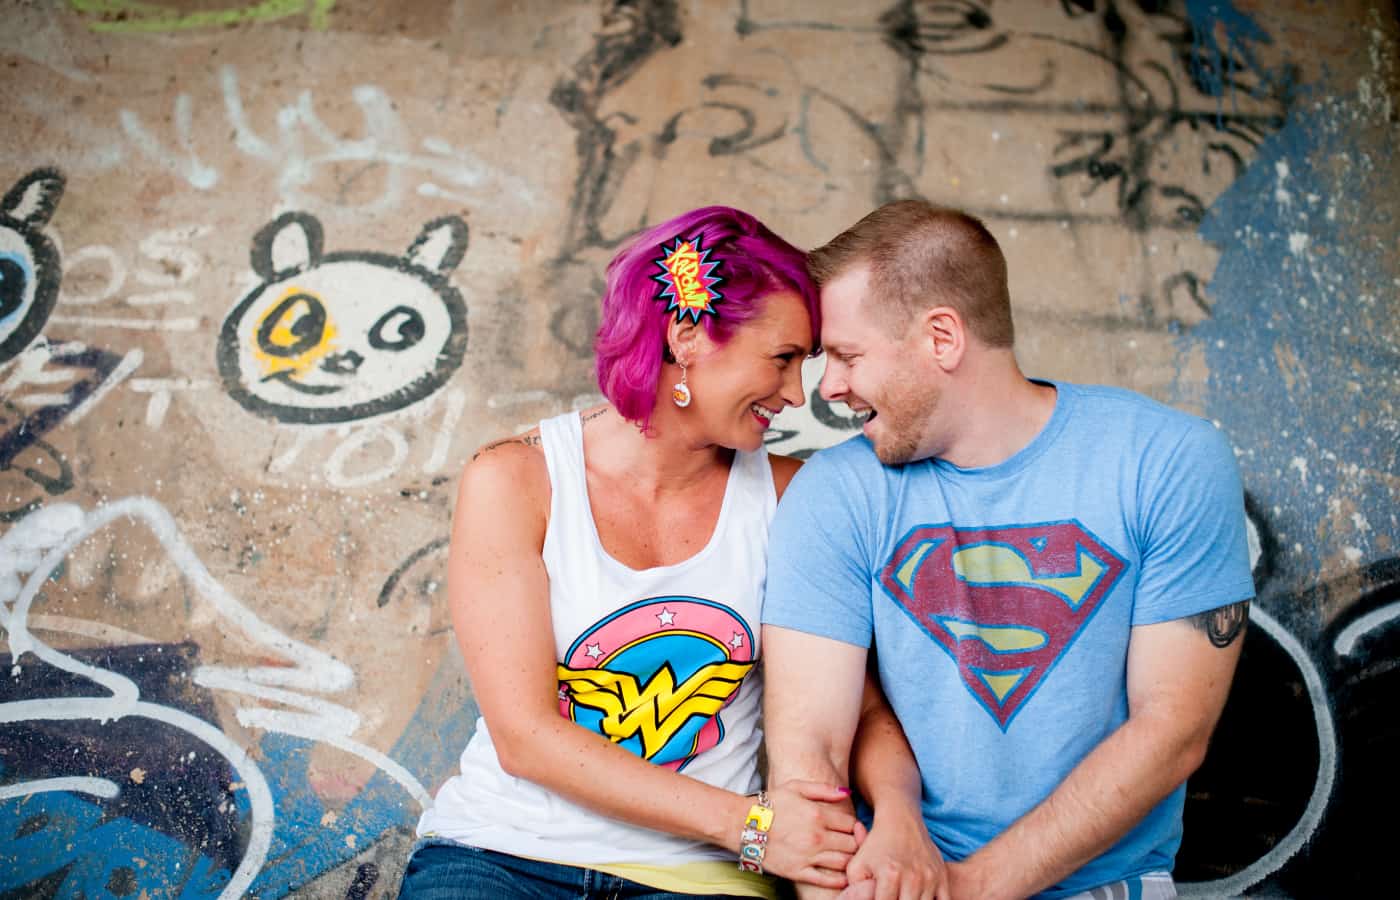 Graffiti background behind a woman with pink hair and a wonder woman t-shirt smiling at a man with a superman t-shirt